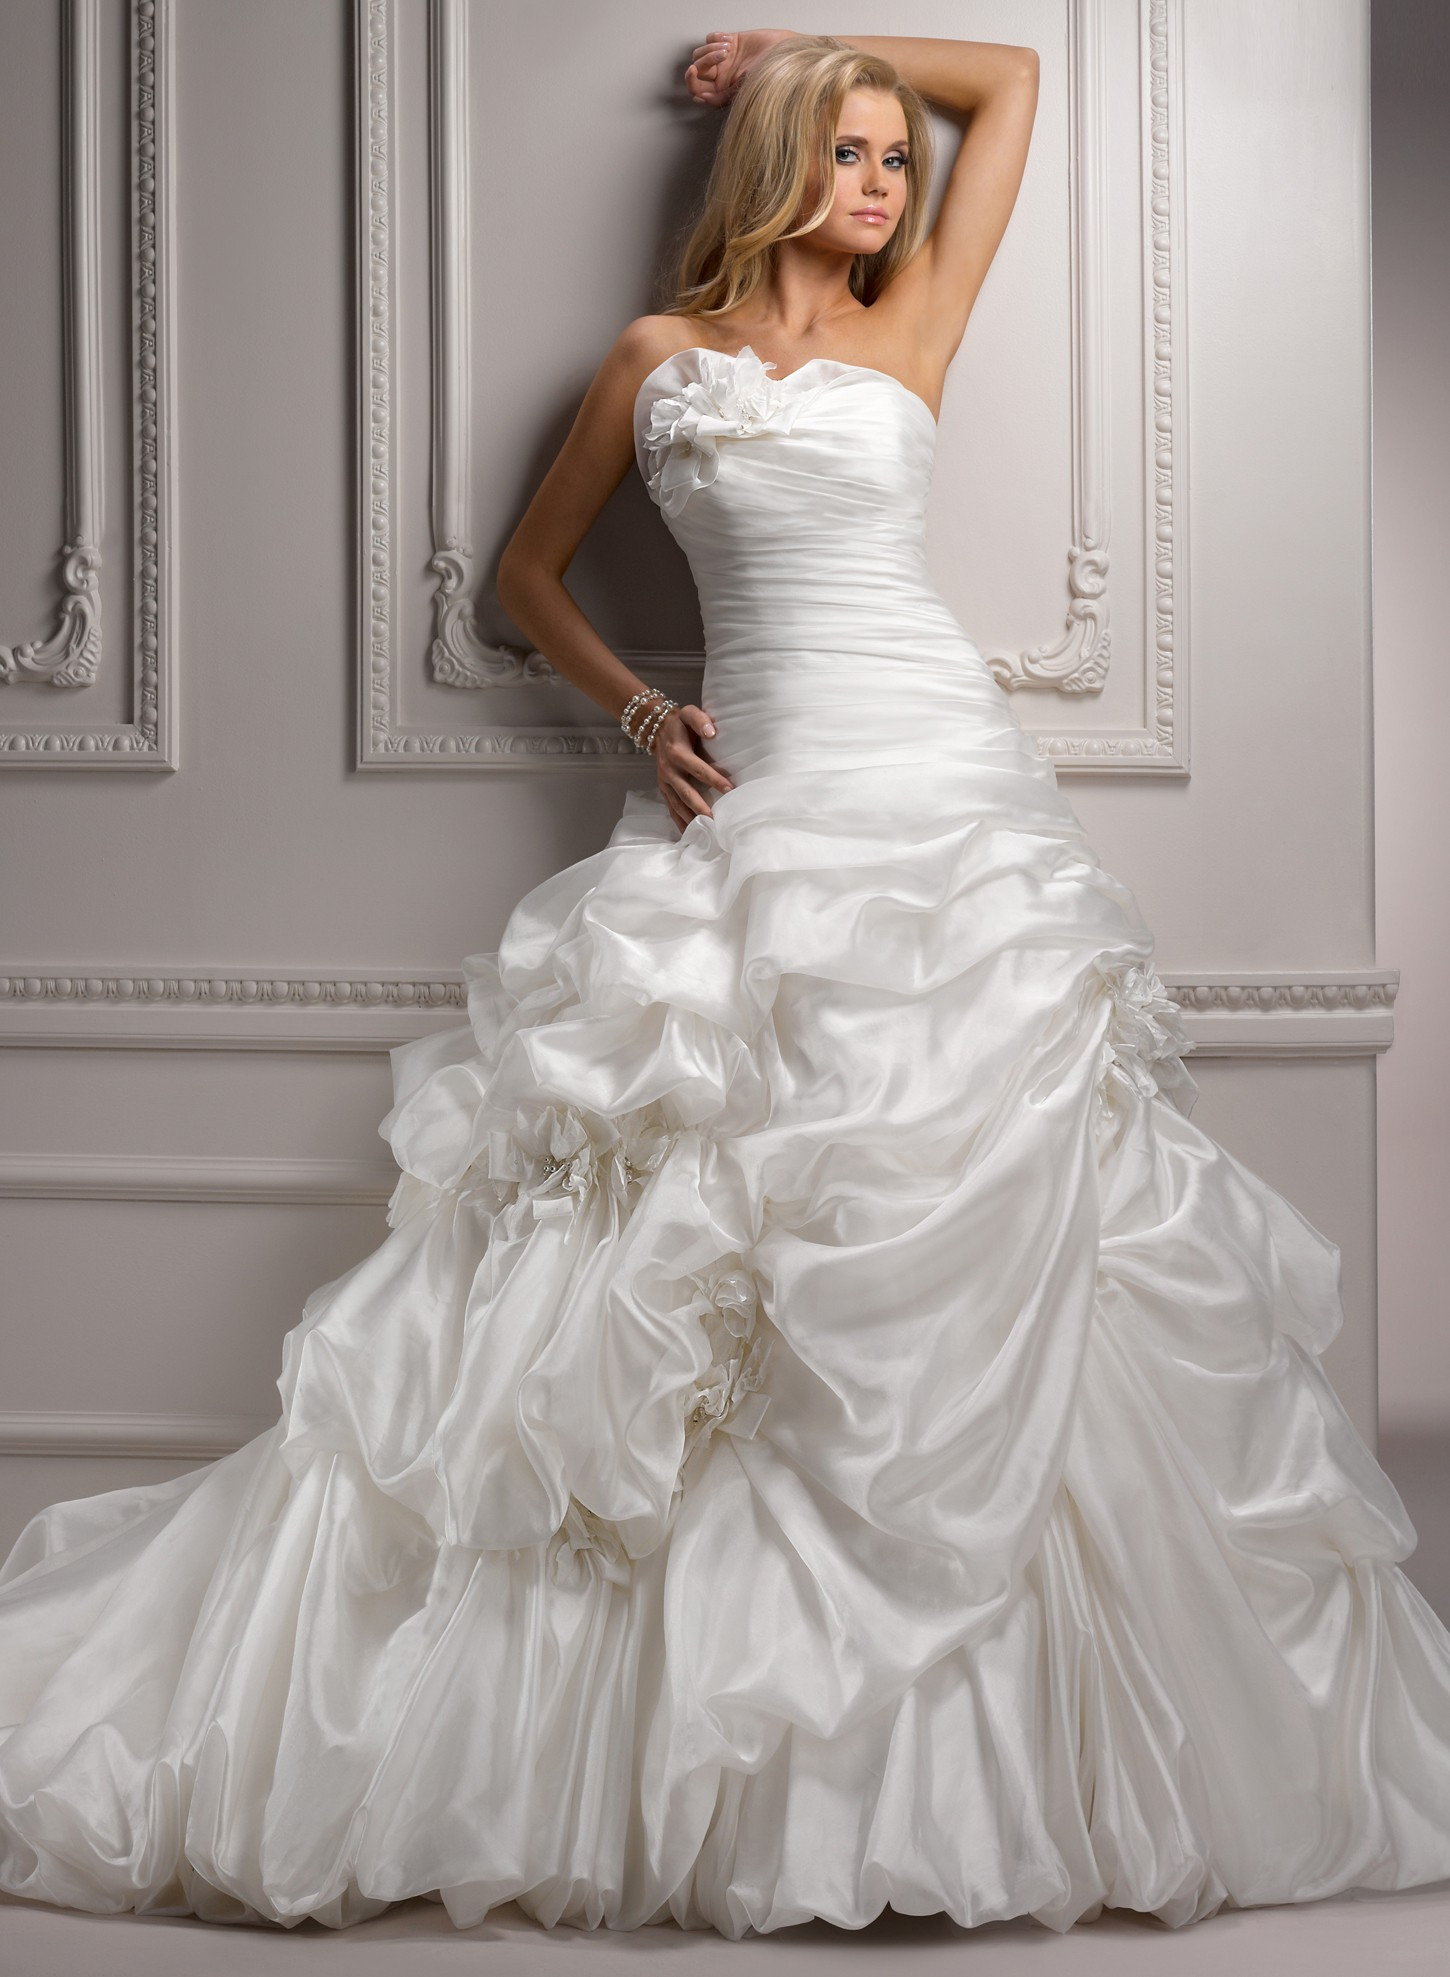 Strapless Wedding Gown
 Strapless Ball Gown Wedding Dresses – Chic and Elegant